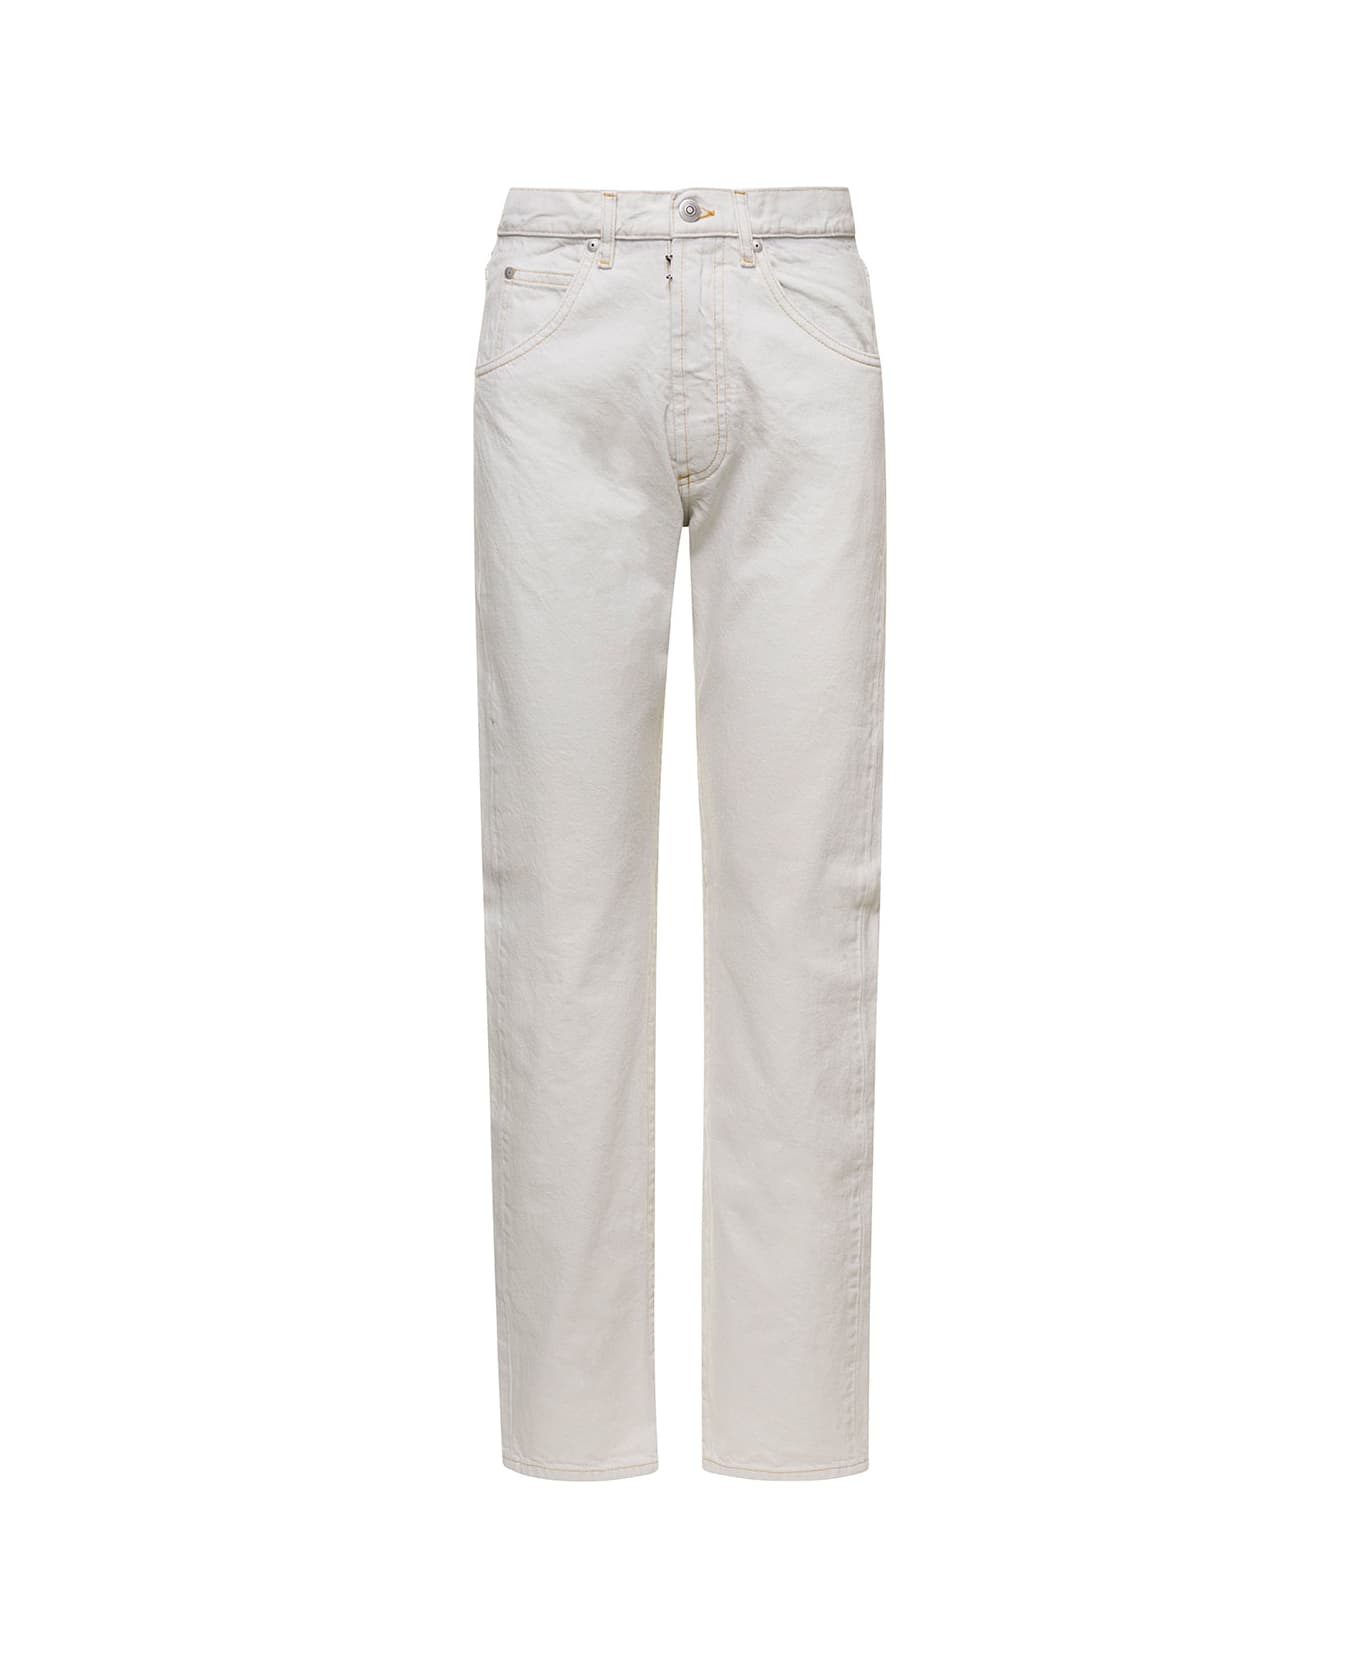 Maison Margiela White 5-pocket Style Straight Jeans With Contrasting Stitching In Cotton Denim Woman - White